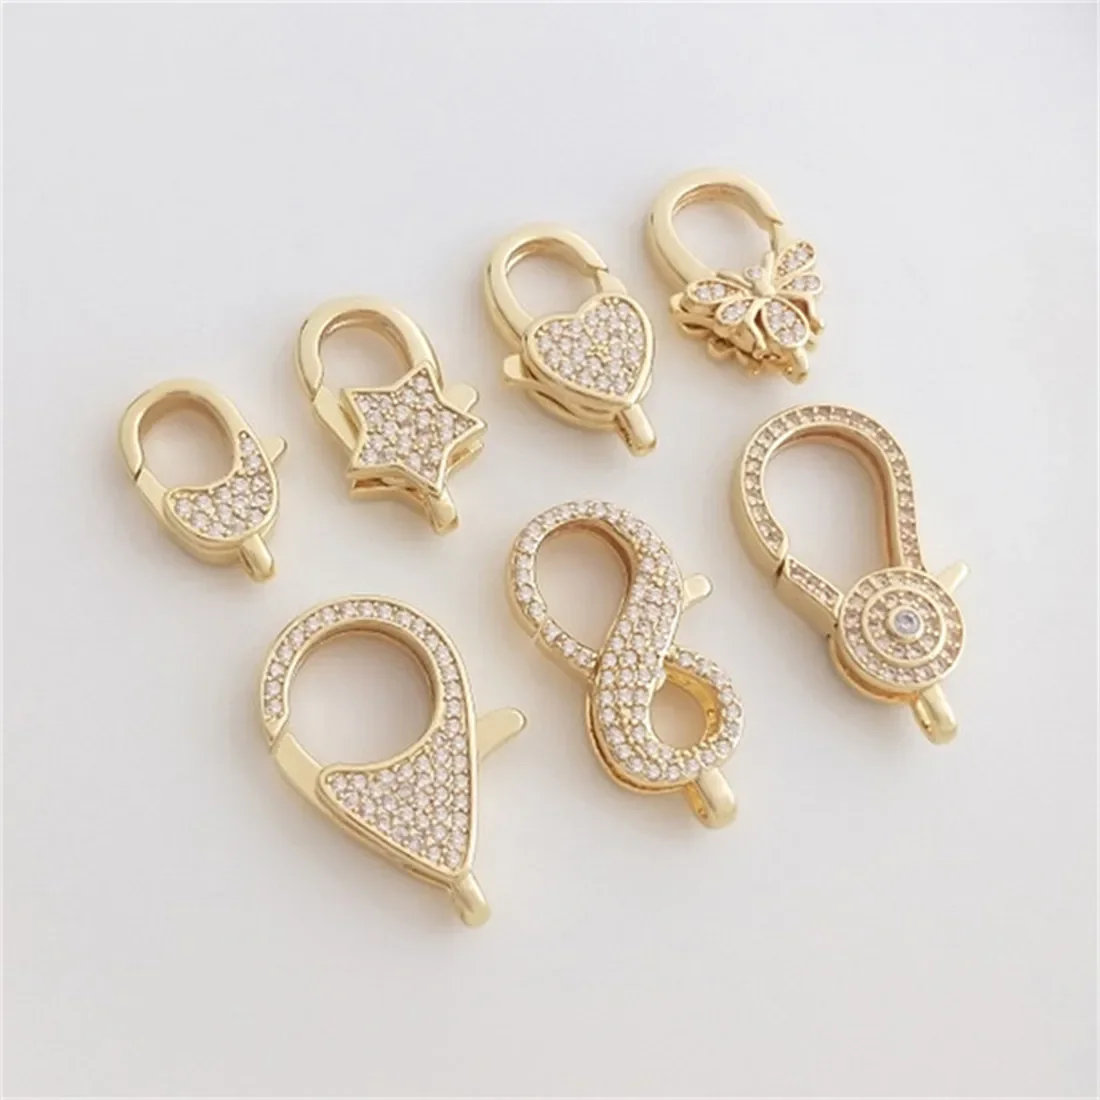 

Micro Inlaid Zircon Spring Buckle 14K Gold Wrapped Five Pointed Star Bee Peach Shaped Lobster Buckle DIY High-end Accessory